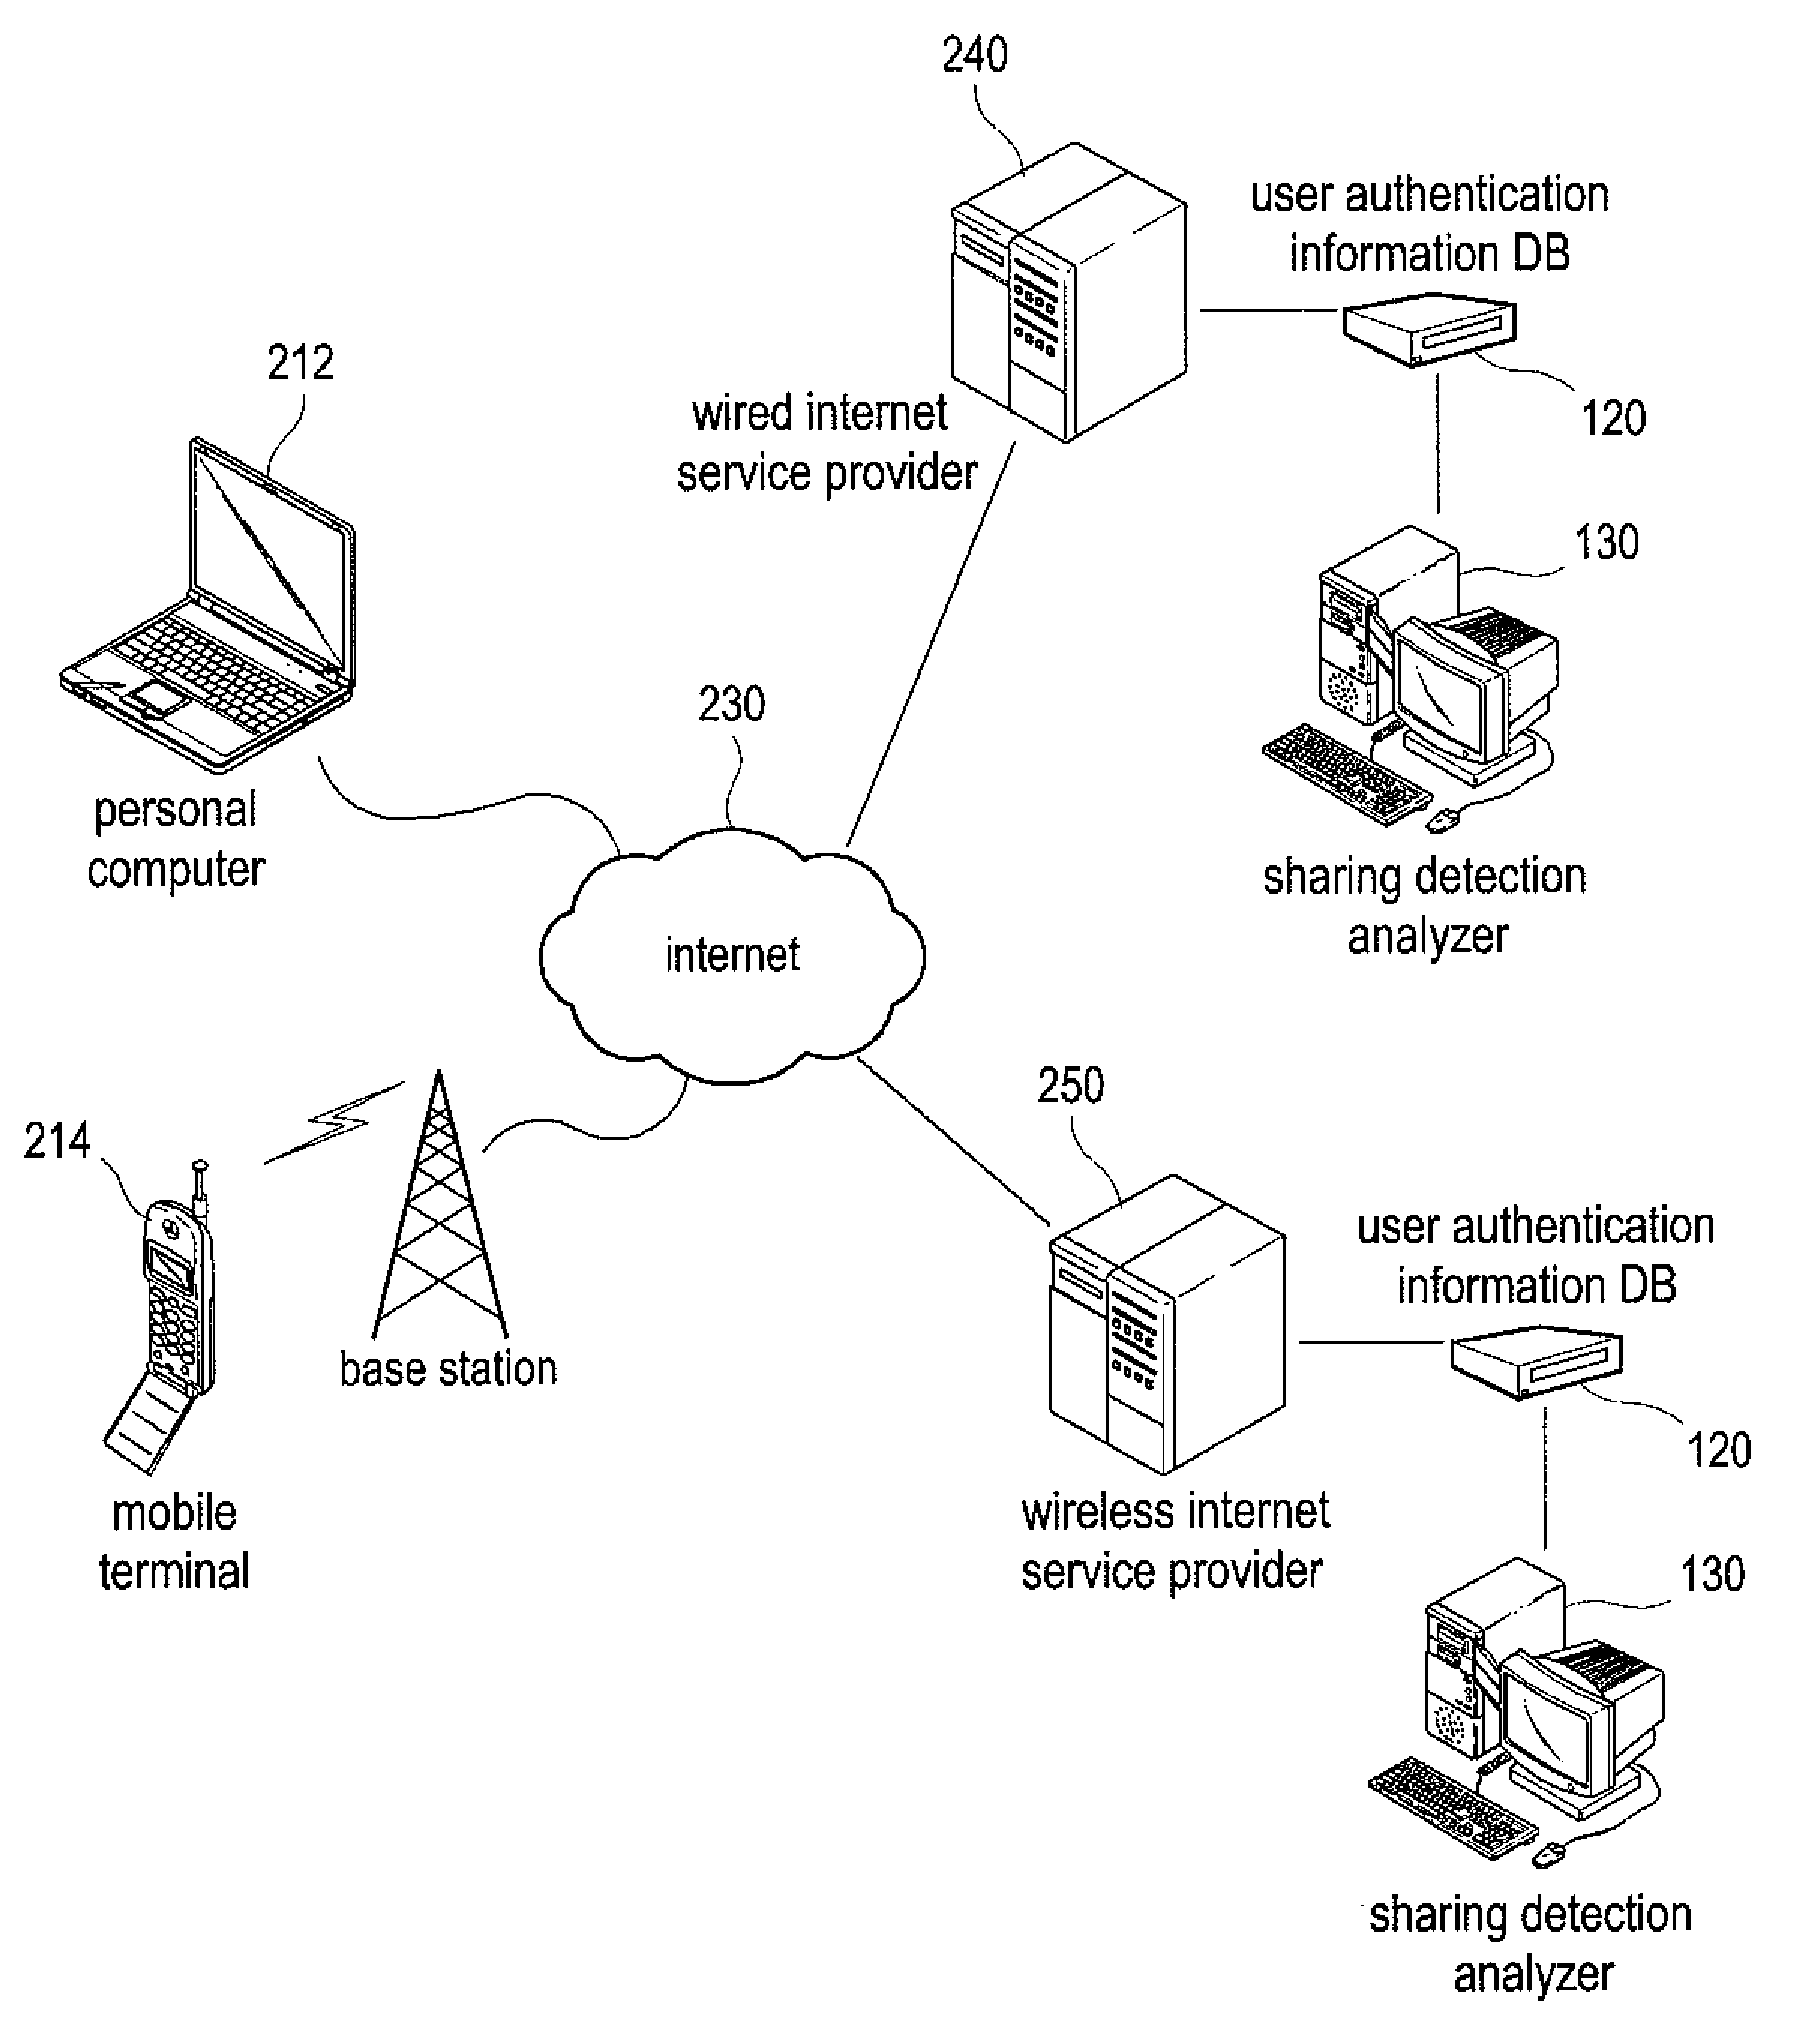 Method and system of detecting account sharing based on behavior patterns